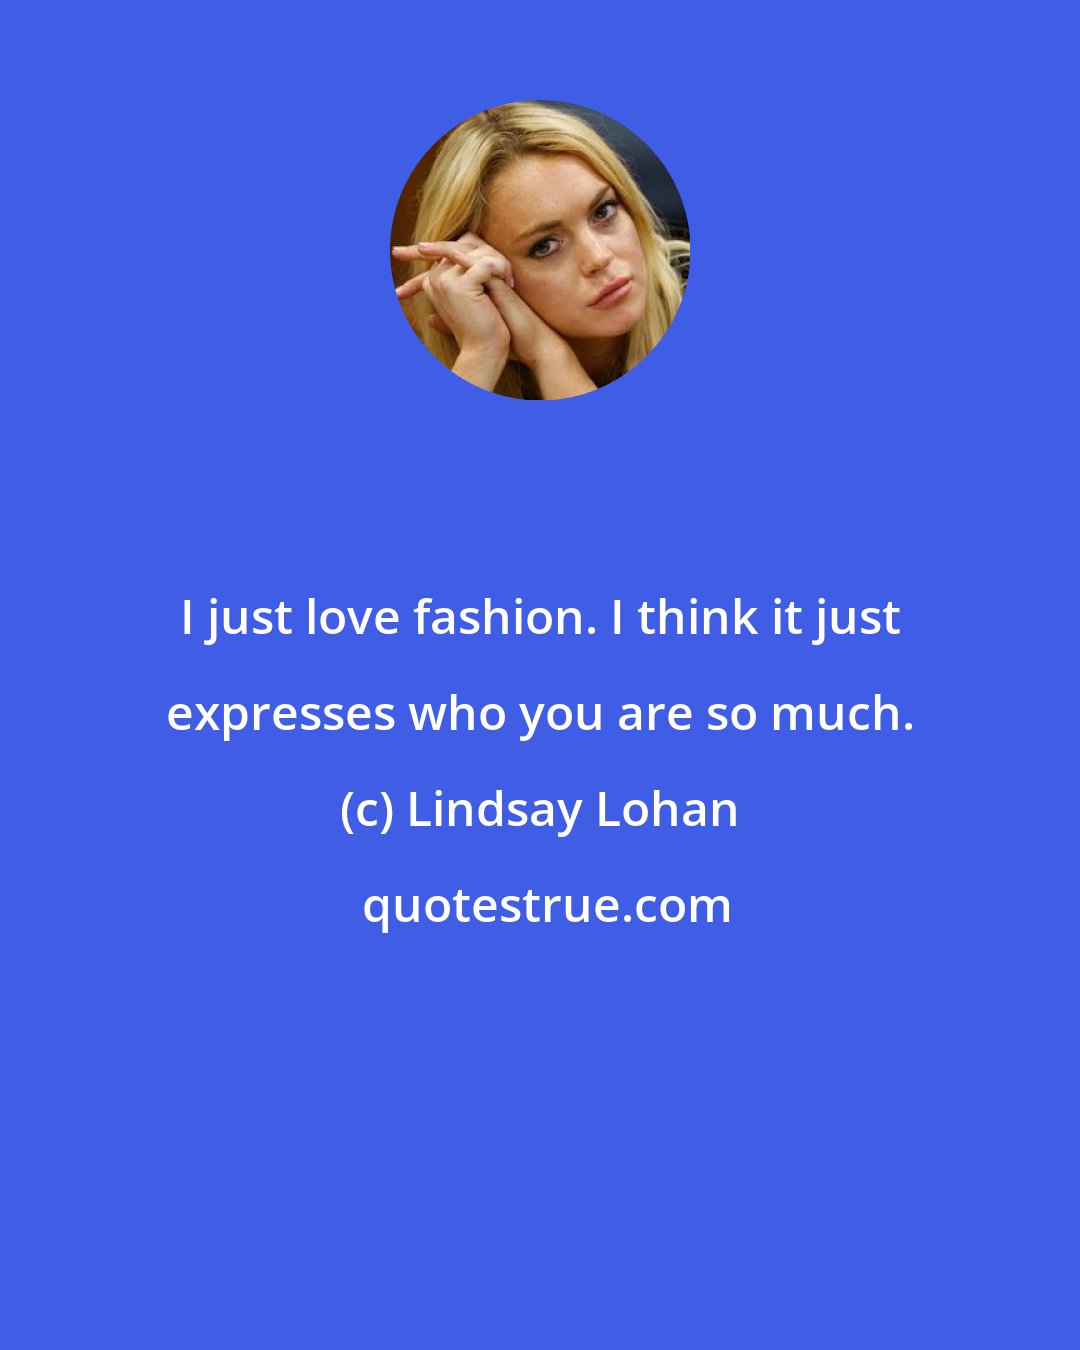 Lindsay Lohan: I just love fashion. I think it just expresses who you are so much.